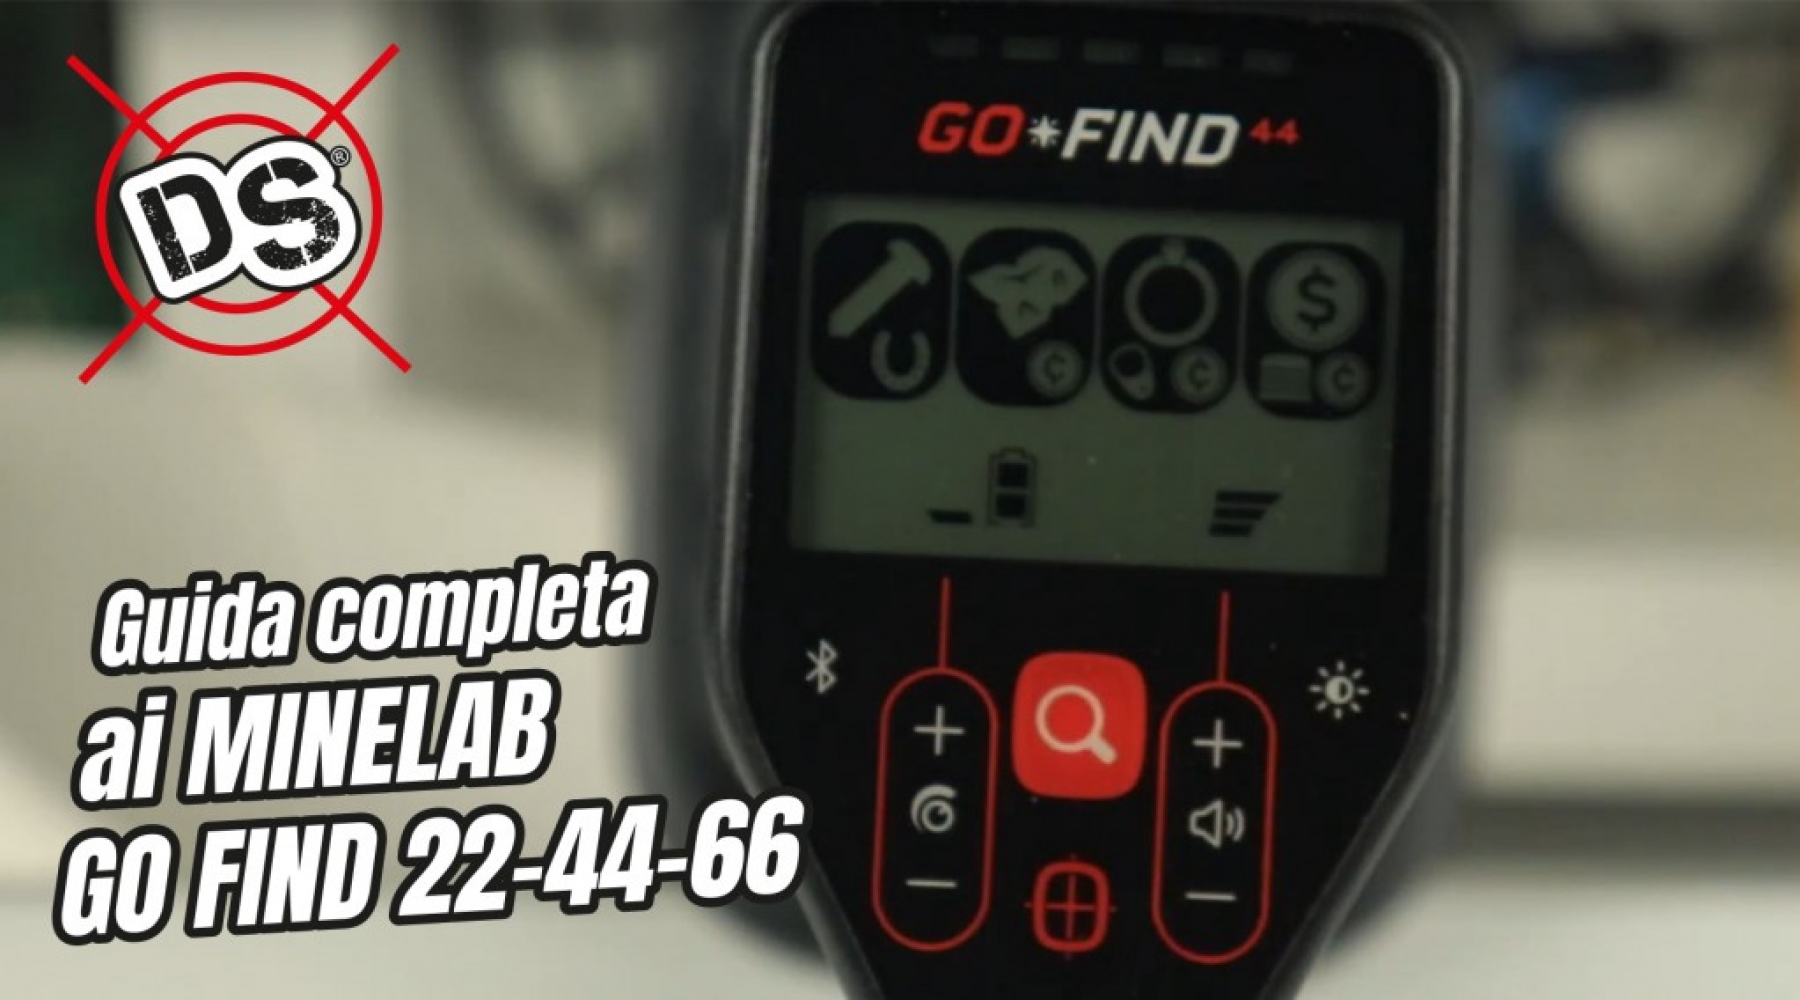 The Complete Guide to the New Minelab Go Find Series